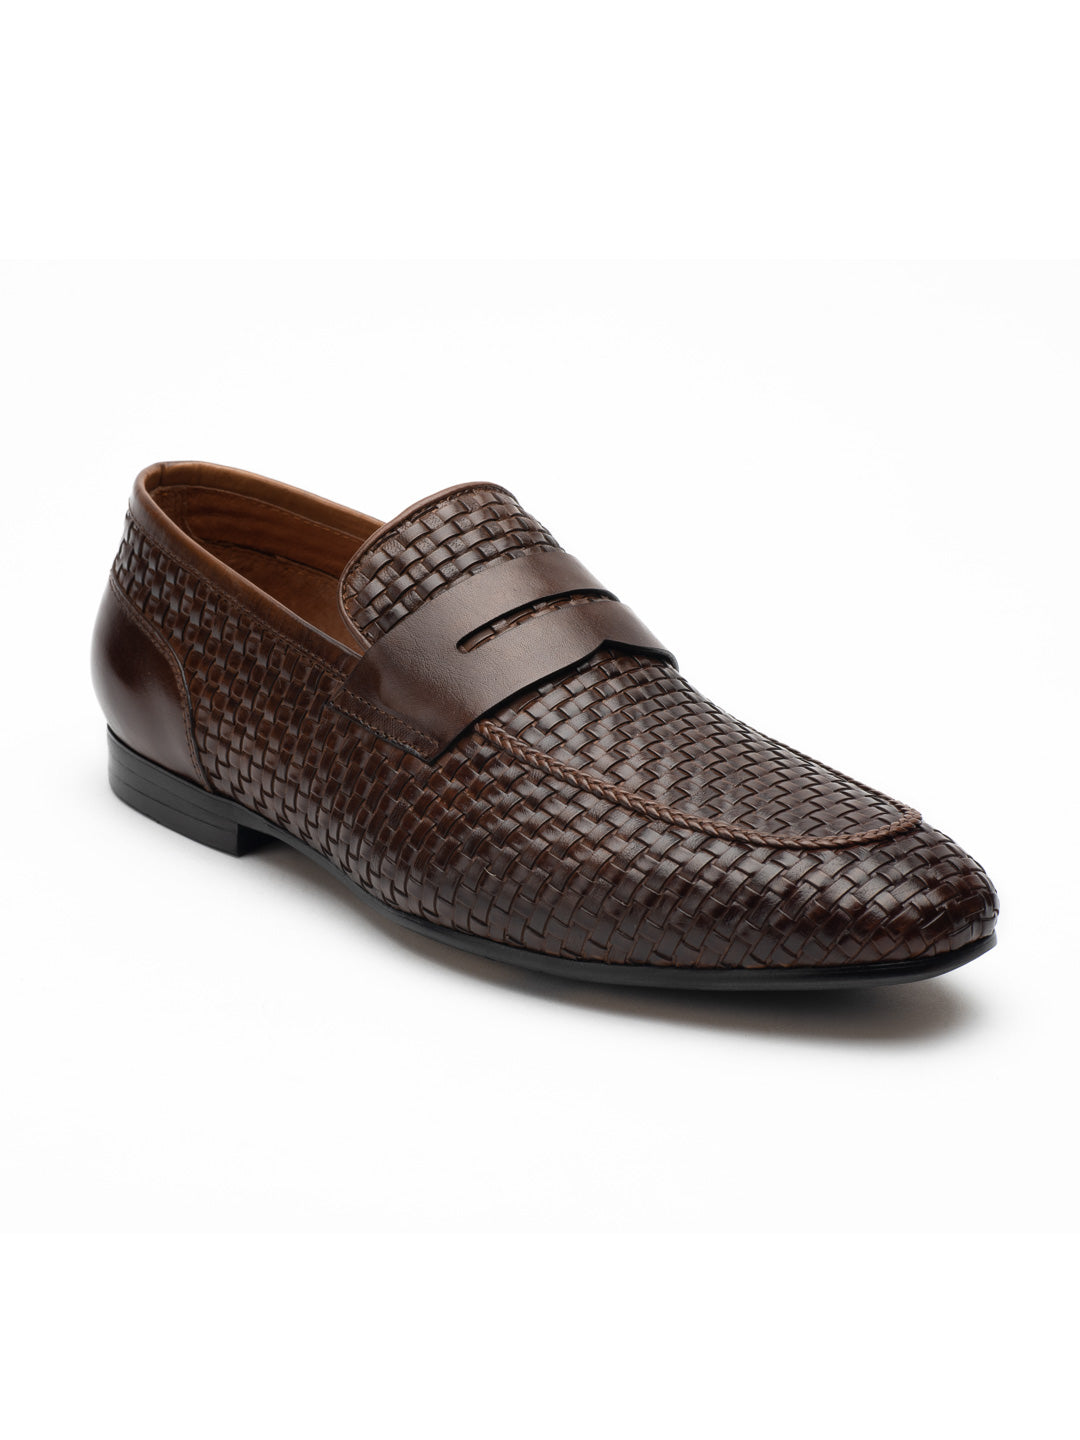 Textured Dark Brown Penny Loafers